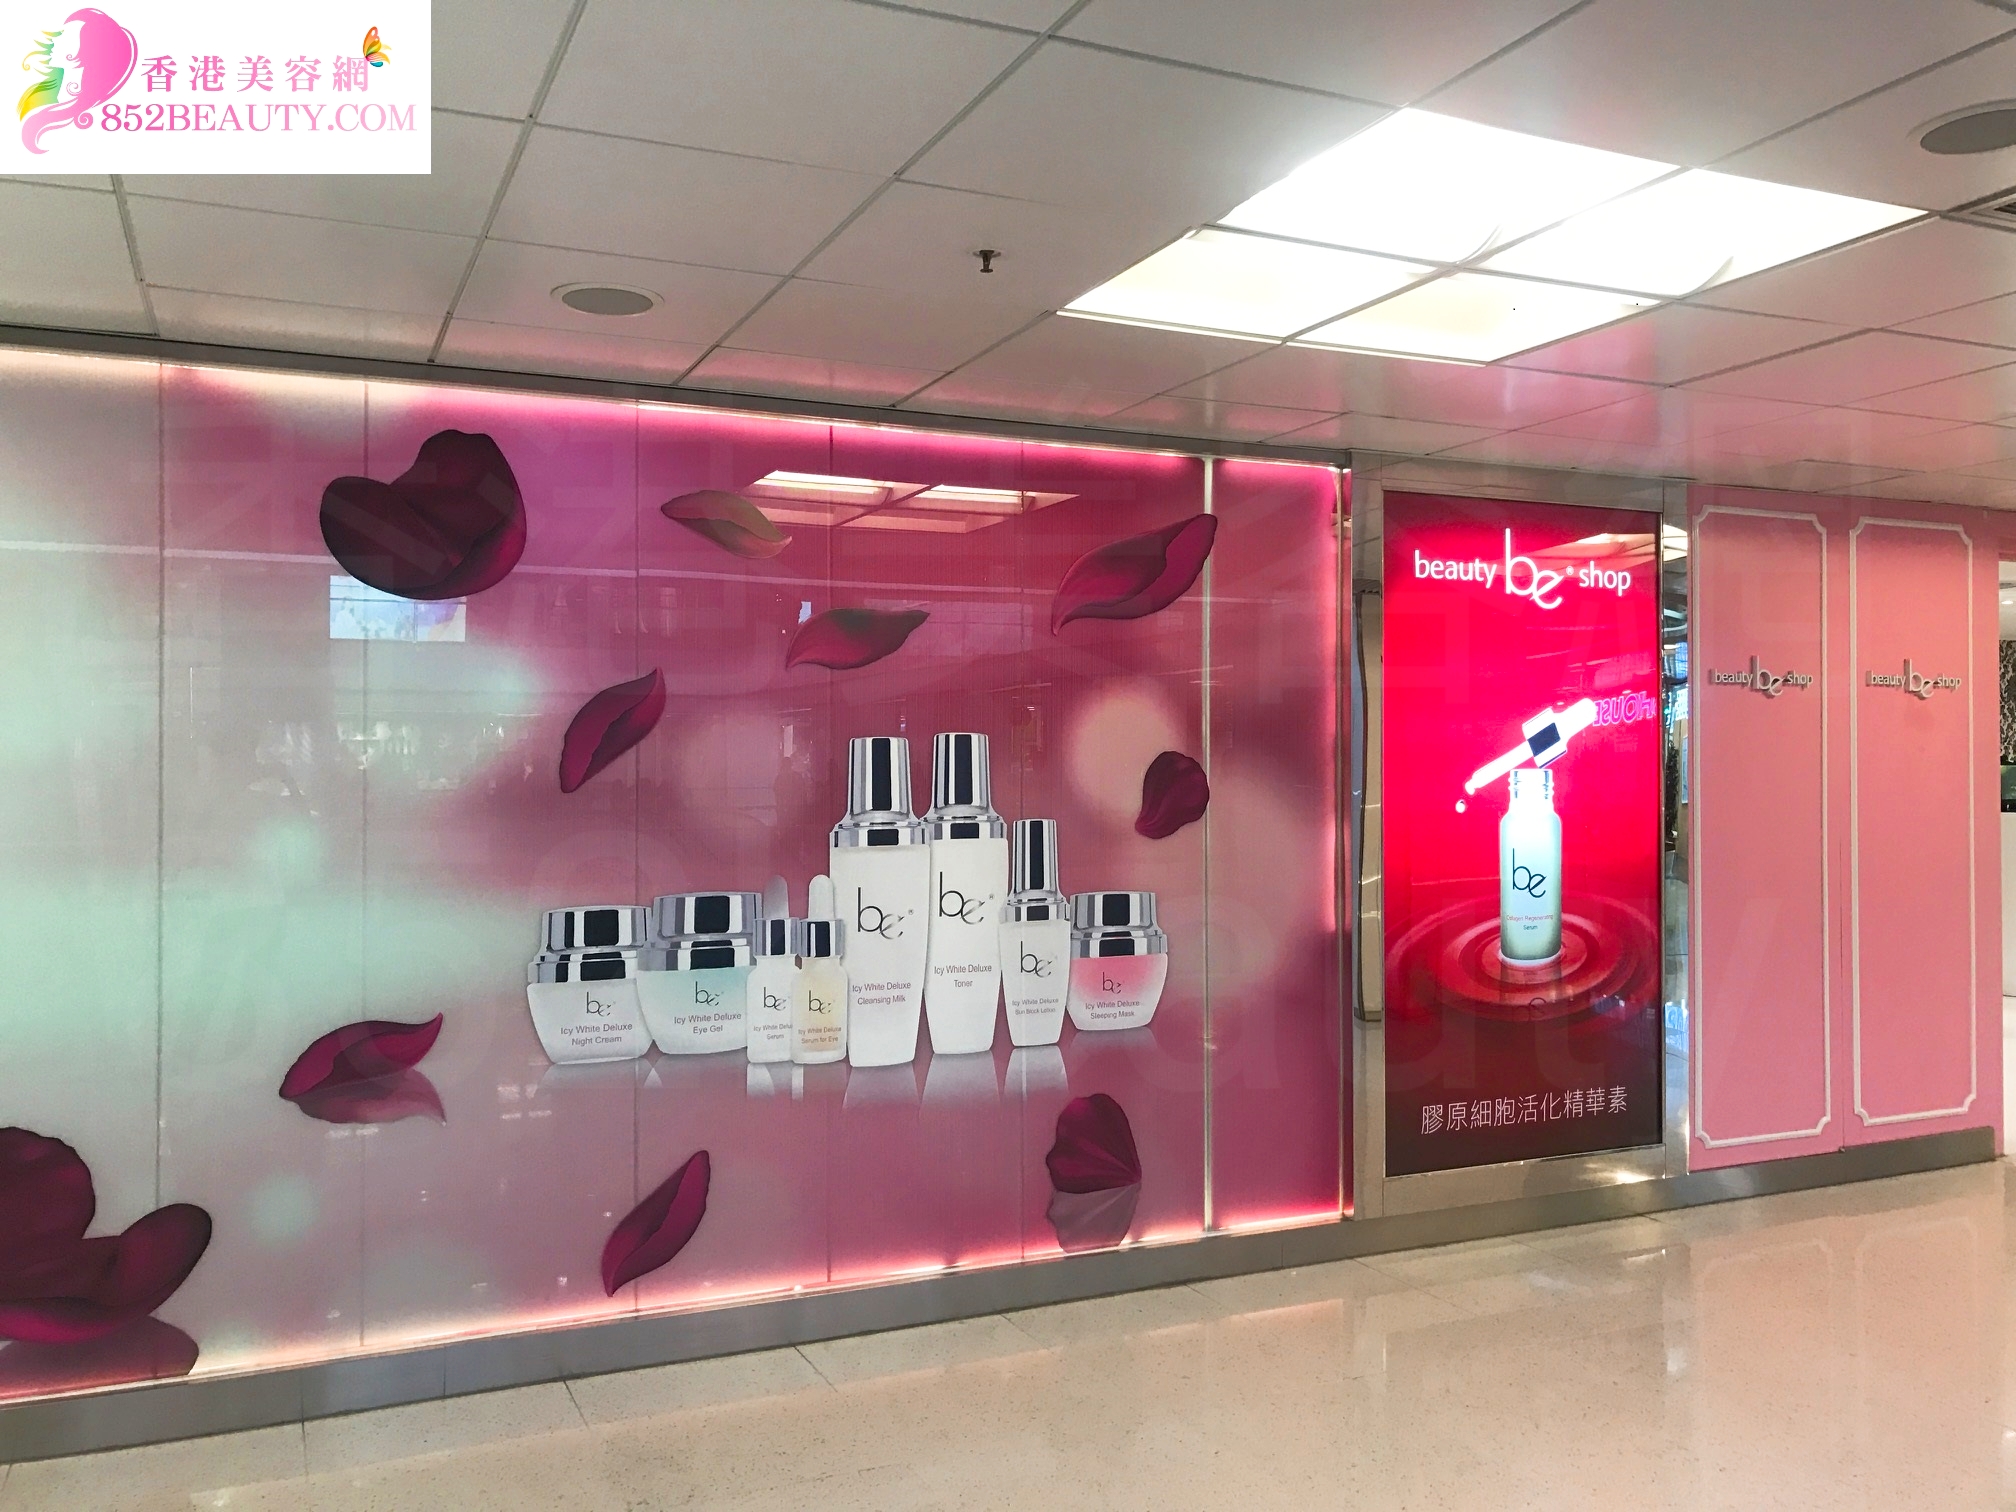 Hand and foot care: be beauty shop (彌敦道)